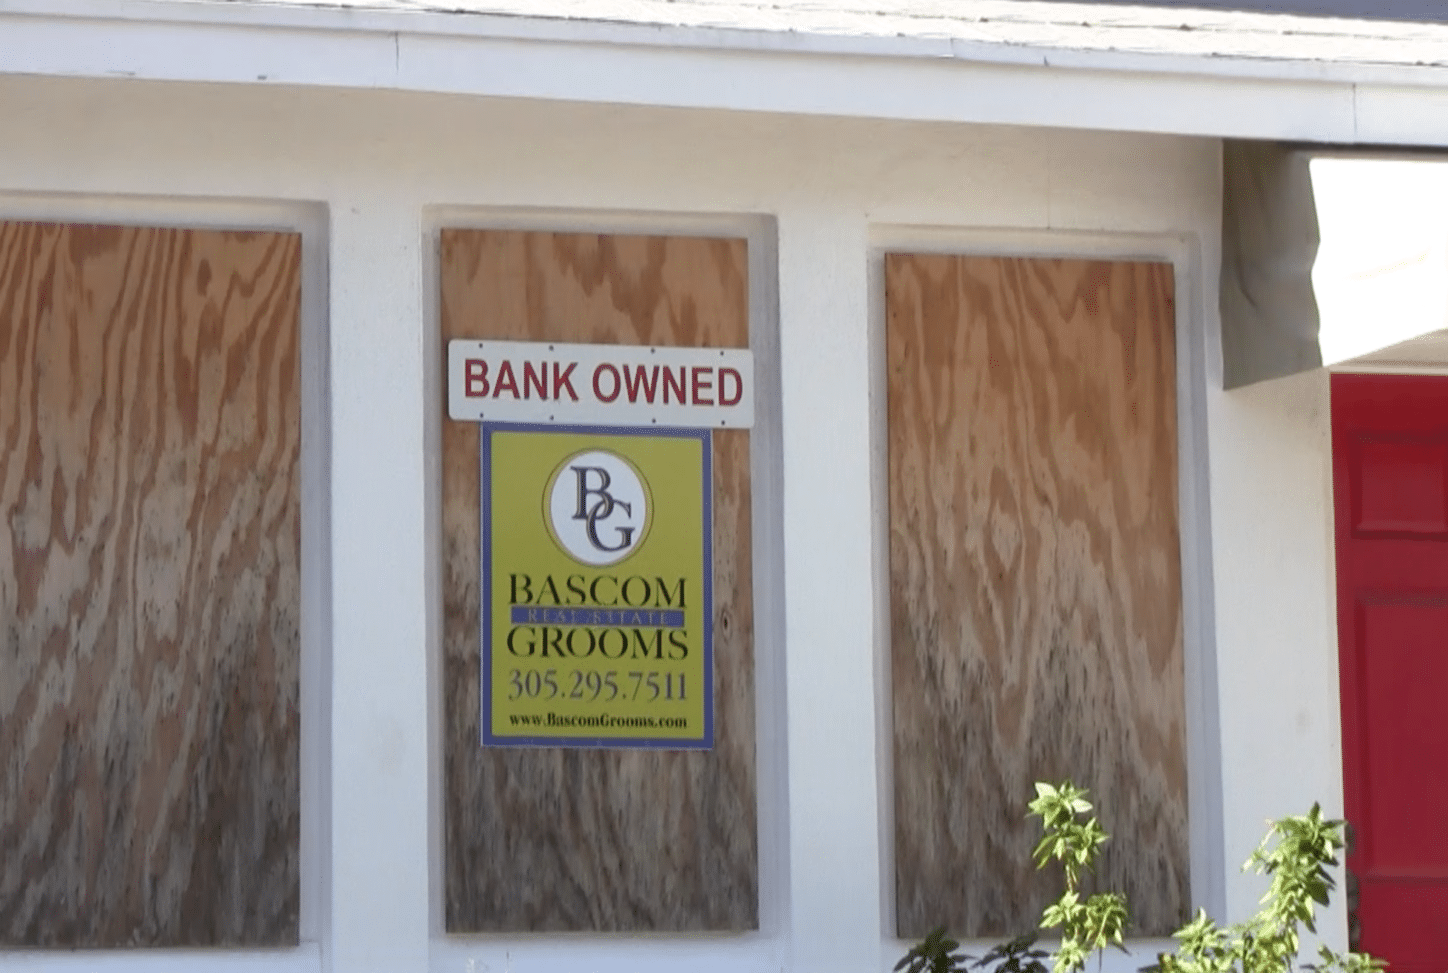 What To Do About Foreclosure